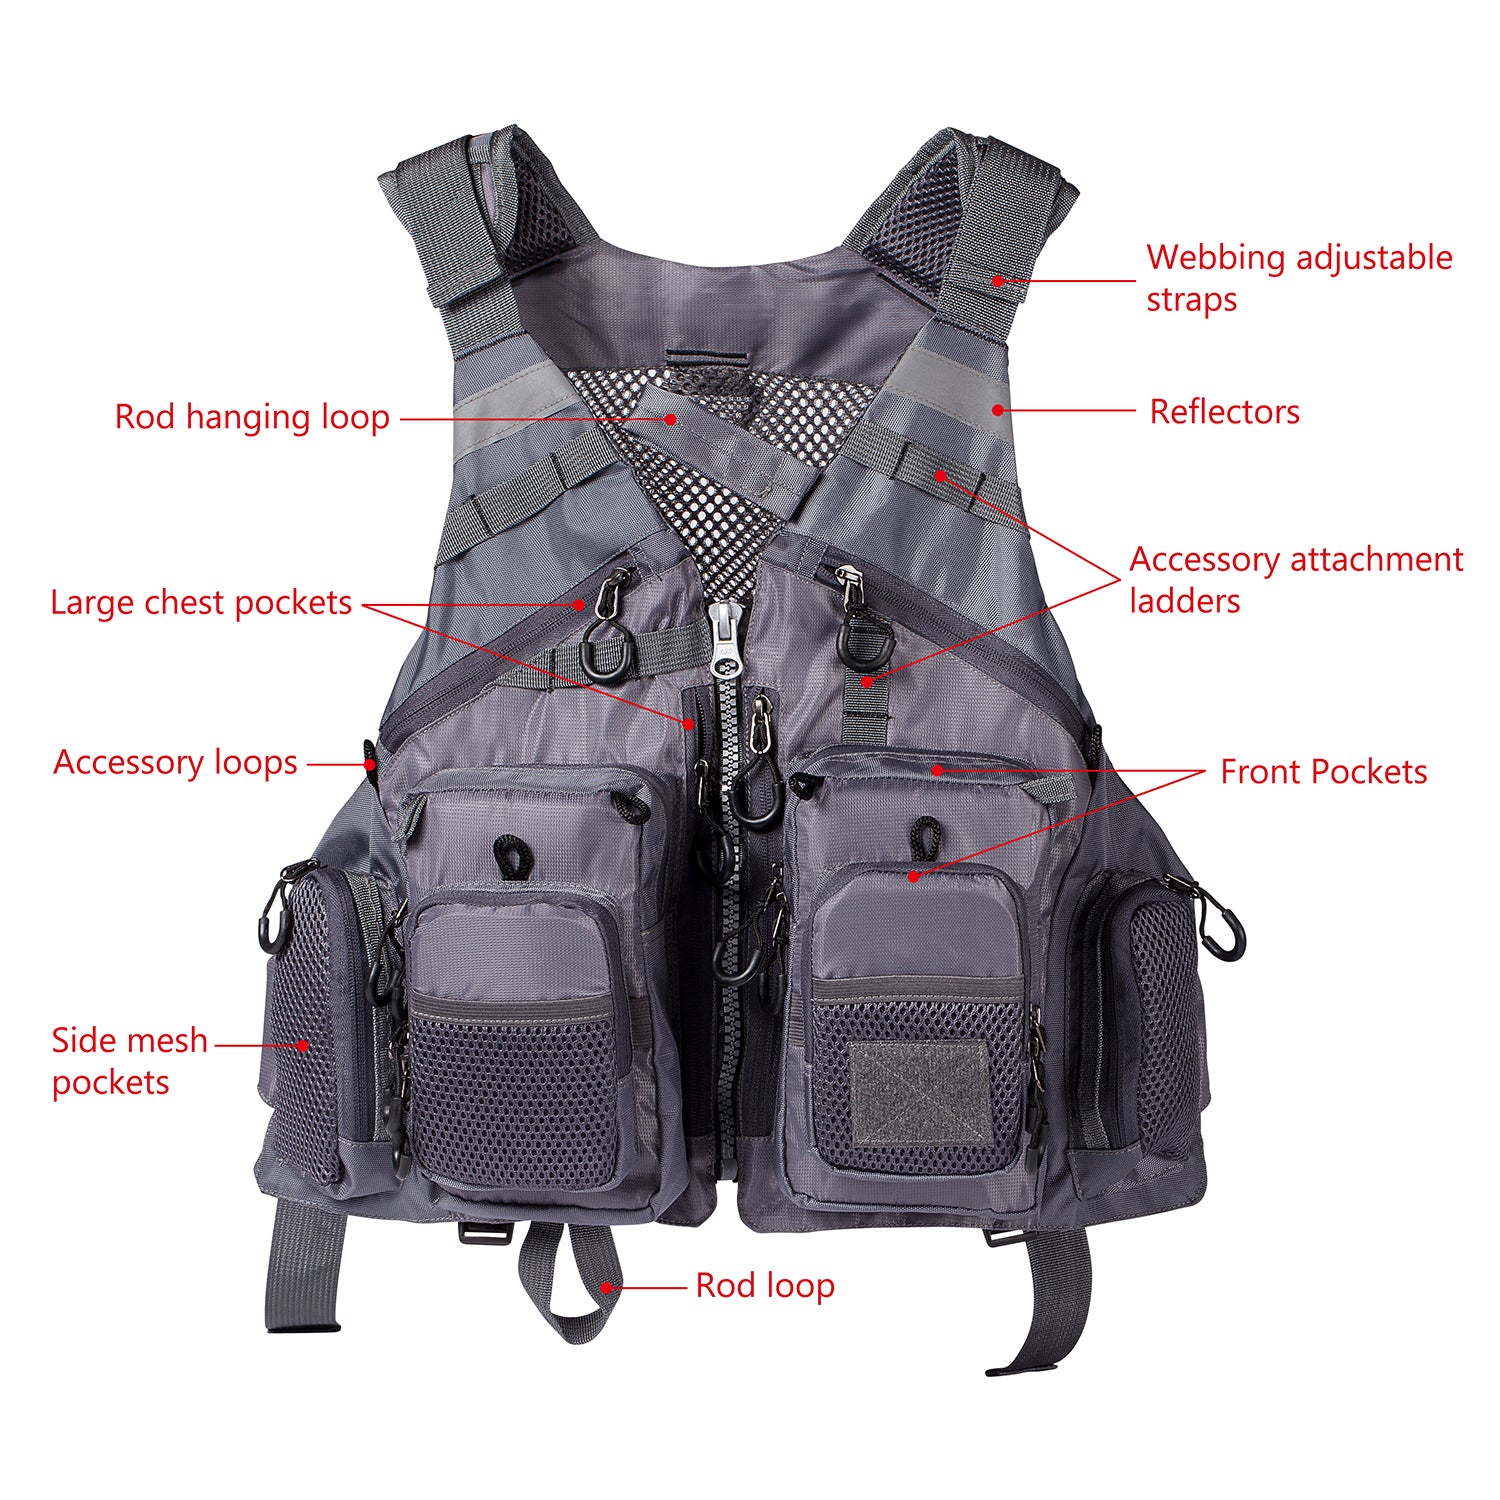 BASSDASH Strap Fishing Vest Adjustable For Men And Women, For Fly Bass Fishing And Outdoor Activities Grey